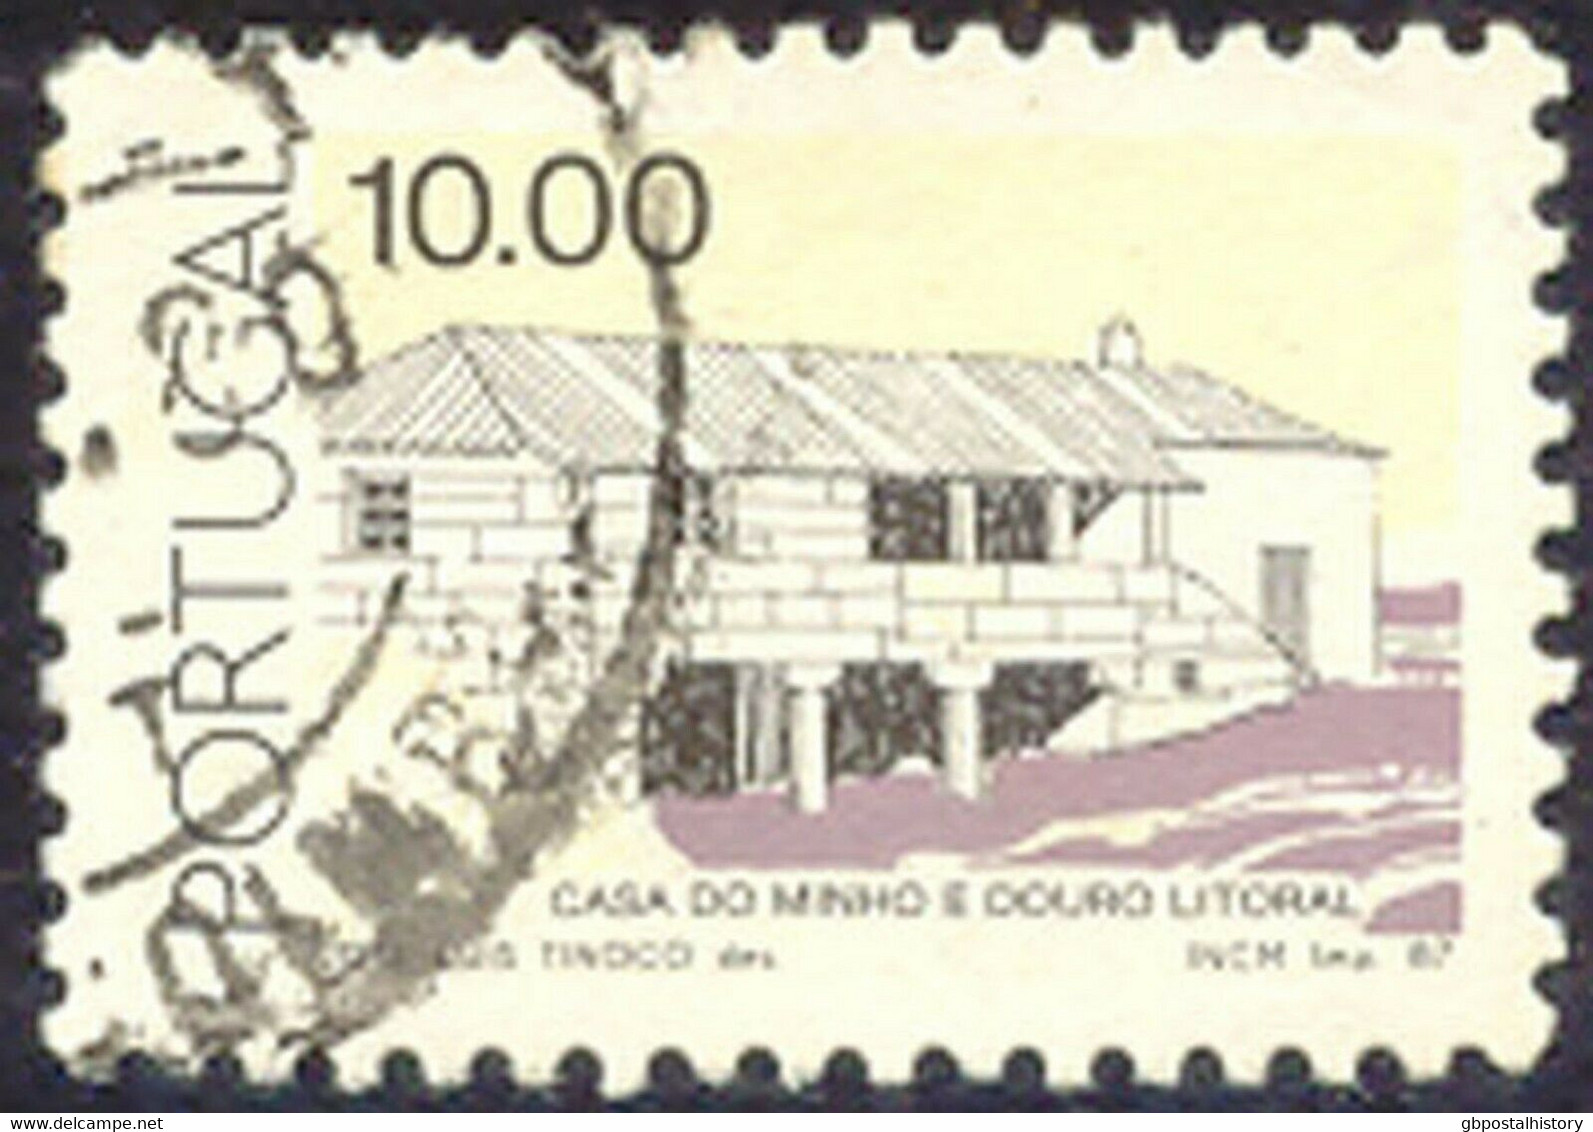 PORTUGAL 1987 10.00 (E.) Landhaus Minho Und Douro Litoral Gest. MISSING COLOUR - Used Stamps